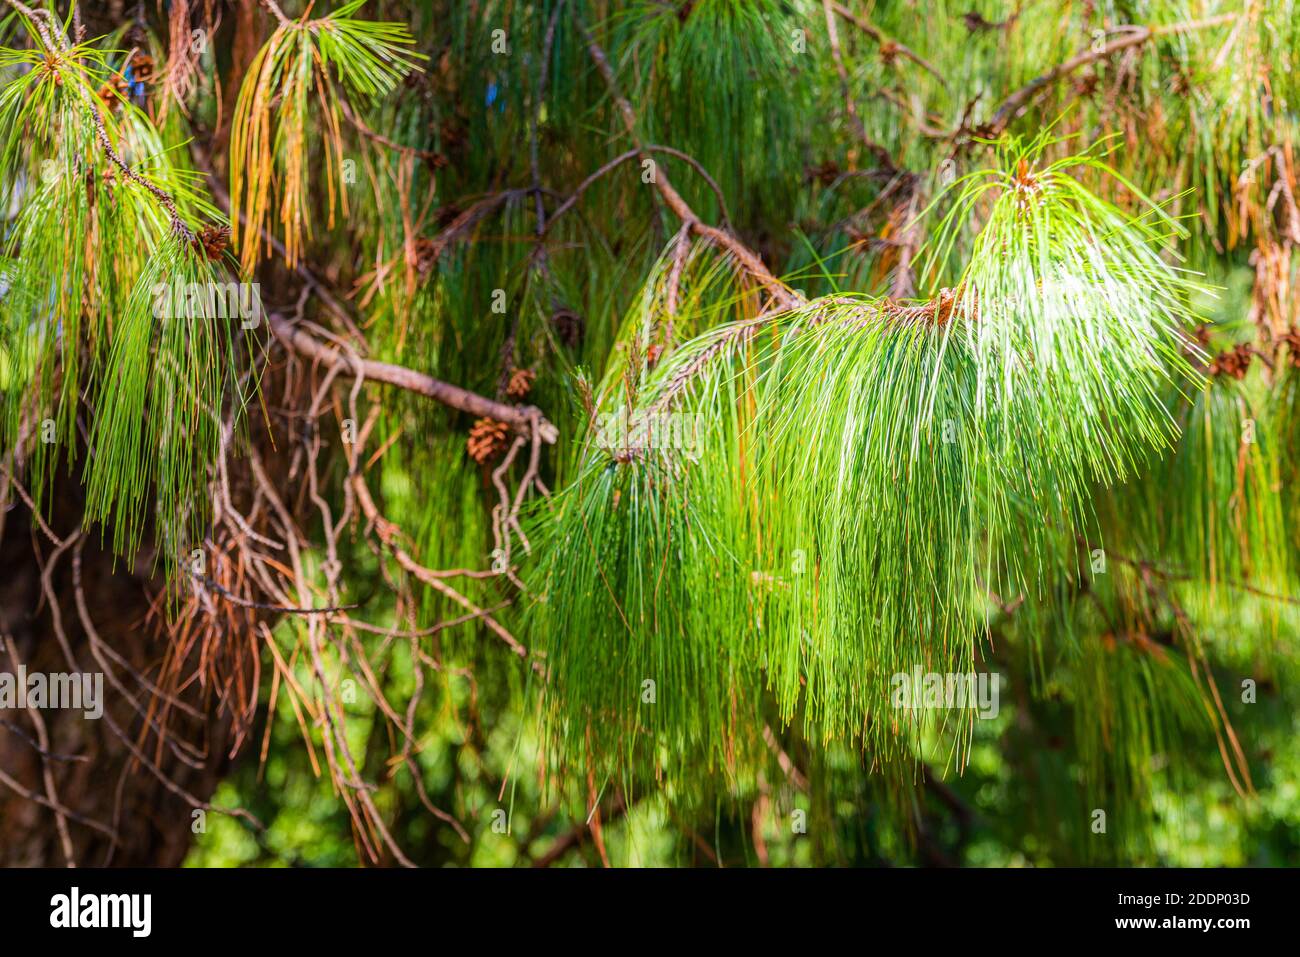 Pinus patula. Pinus strobus pine with a weeping crown. Stock Photo